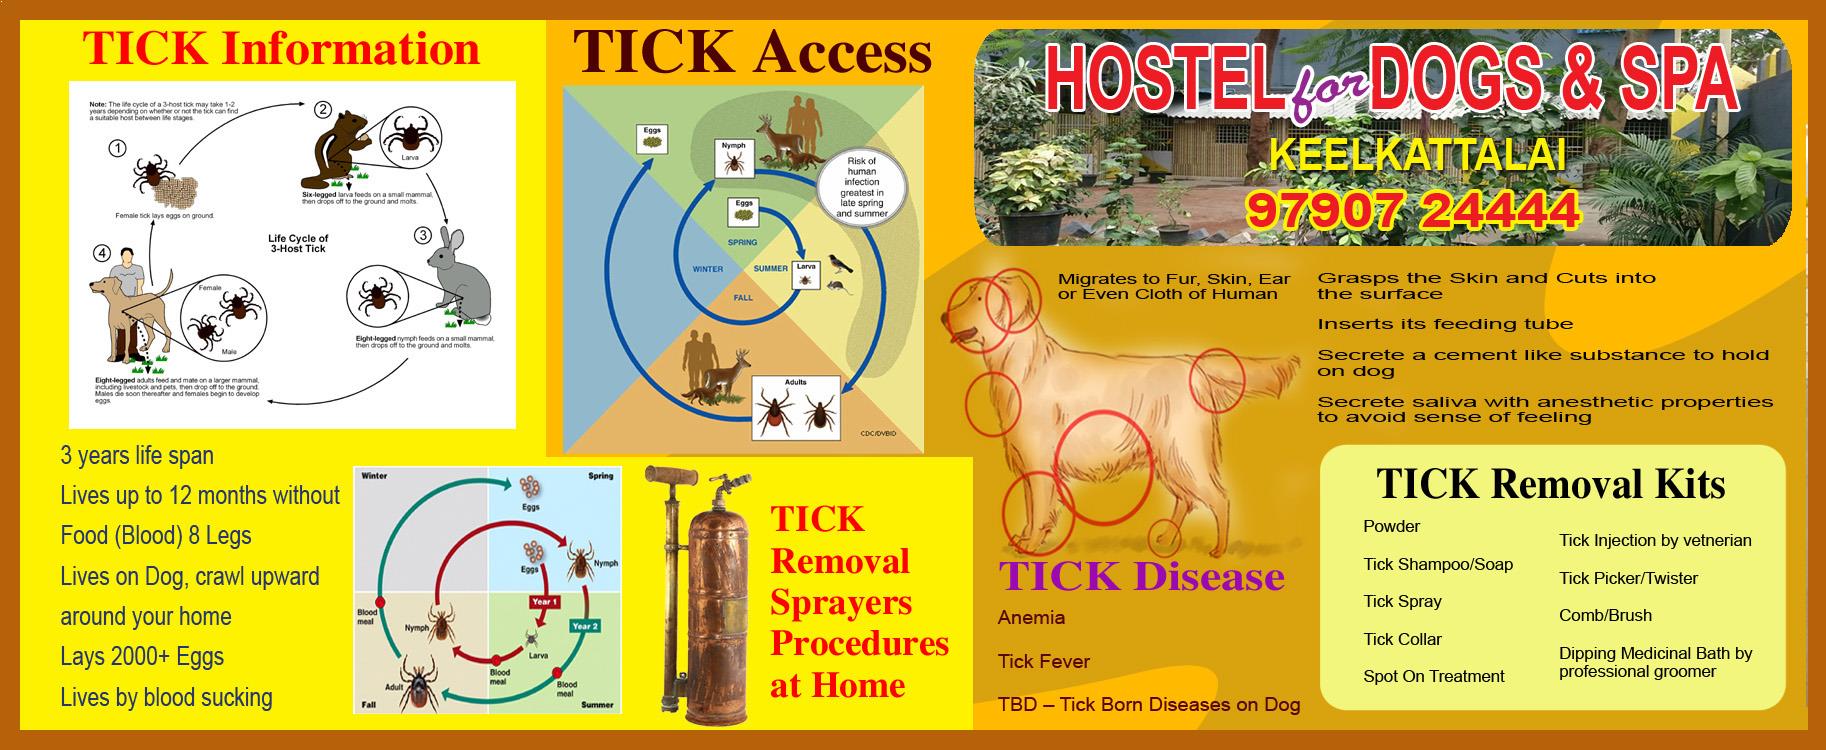 
Tick treatment for dogs
